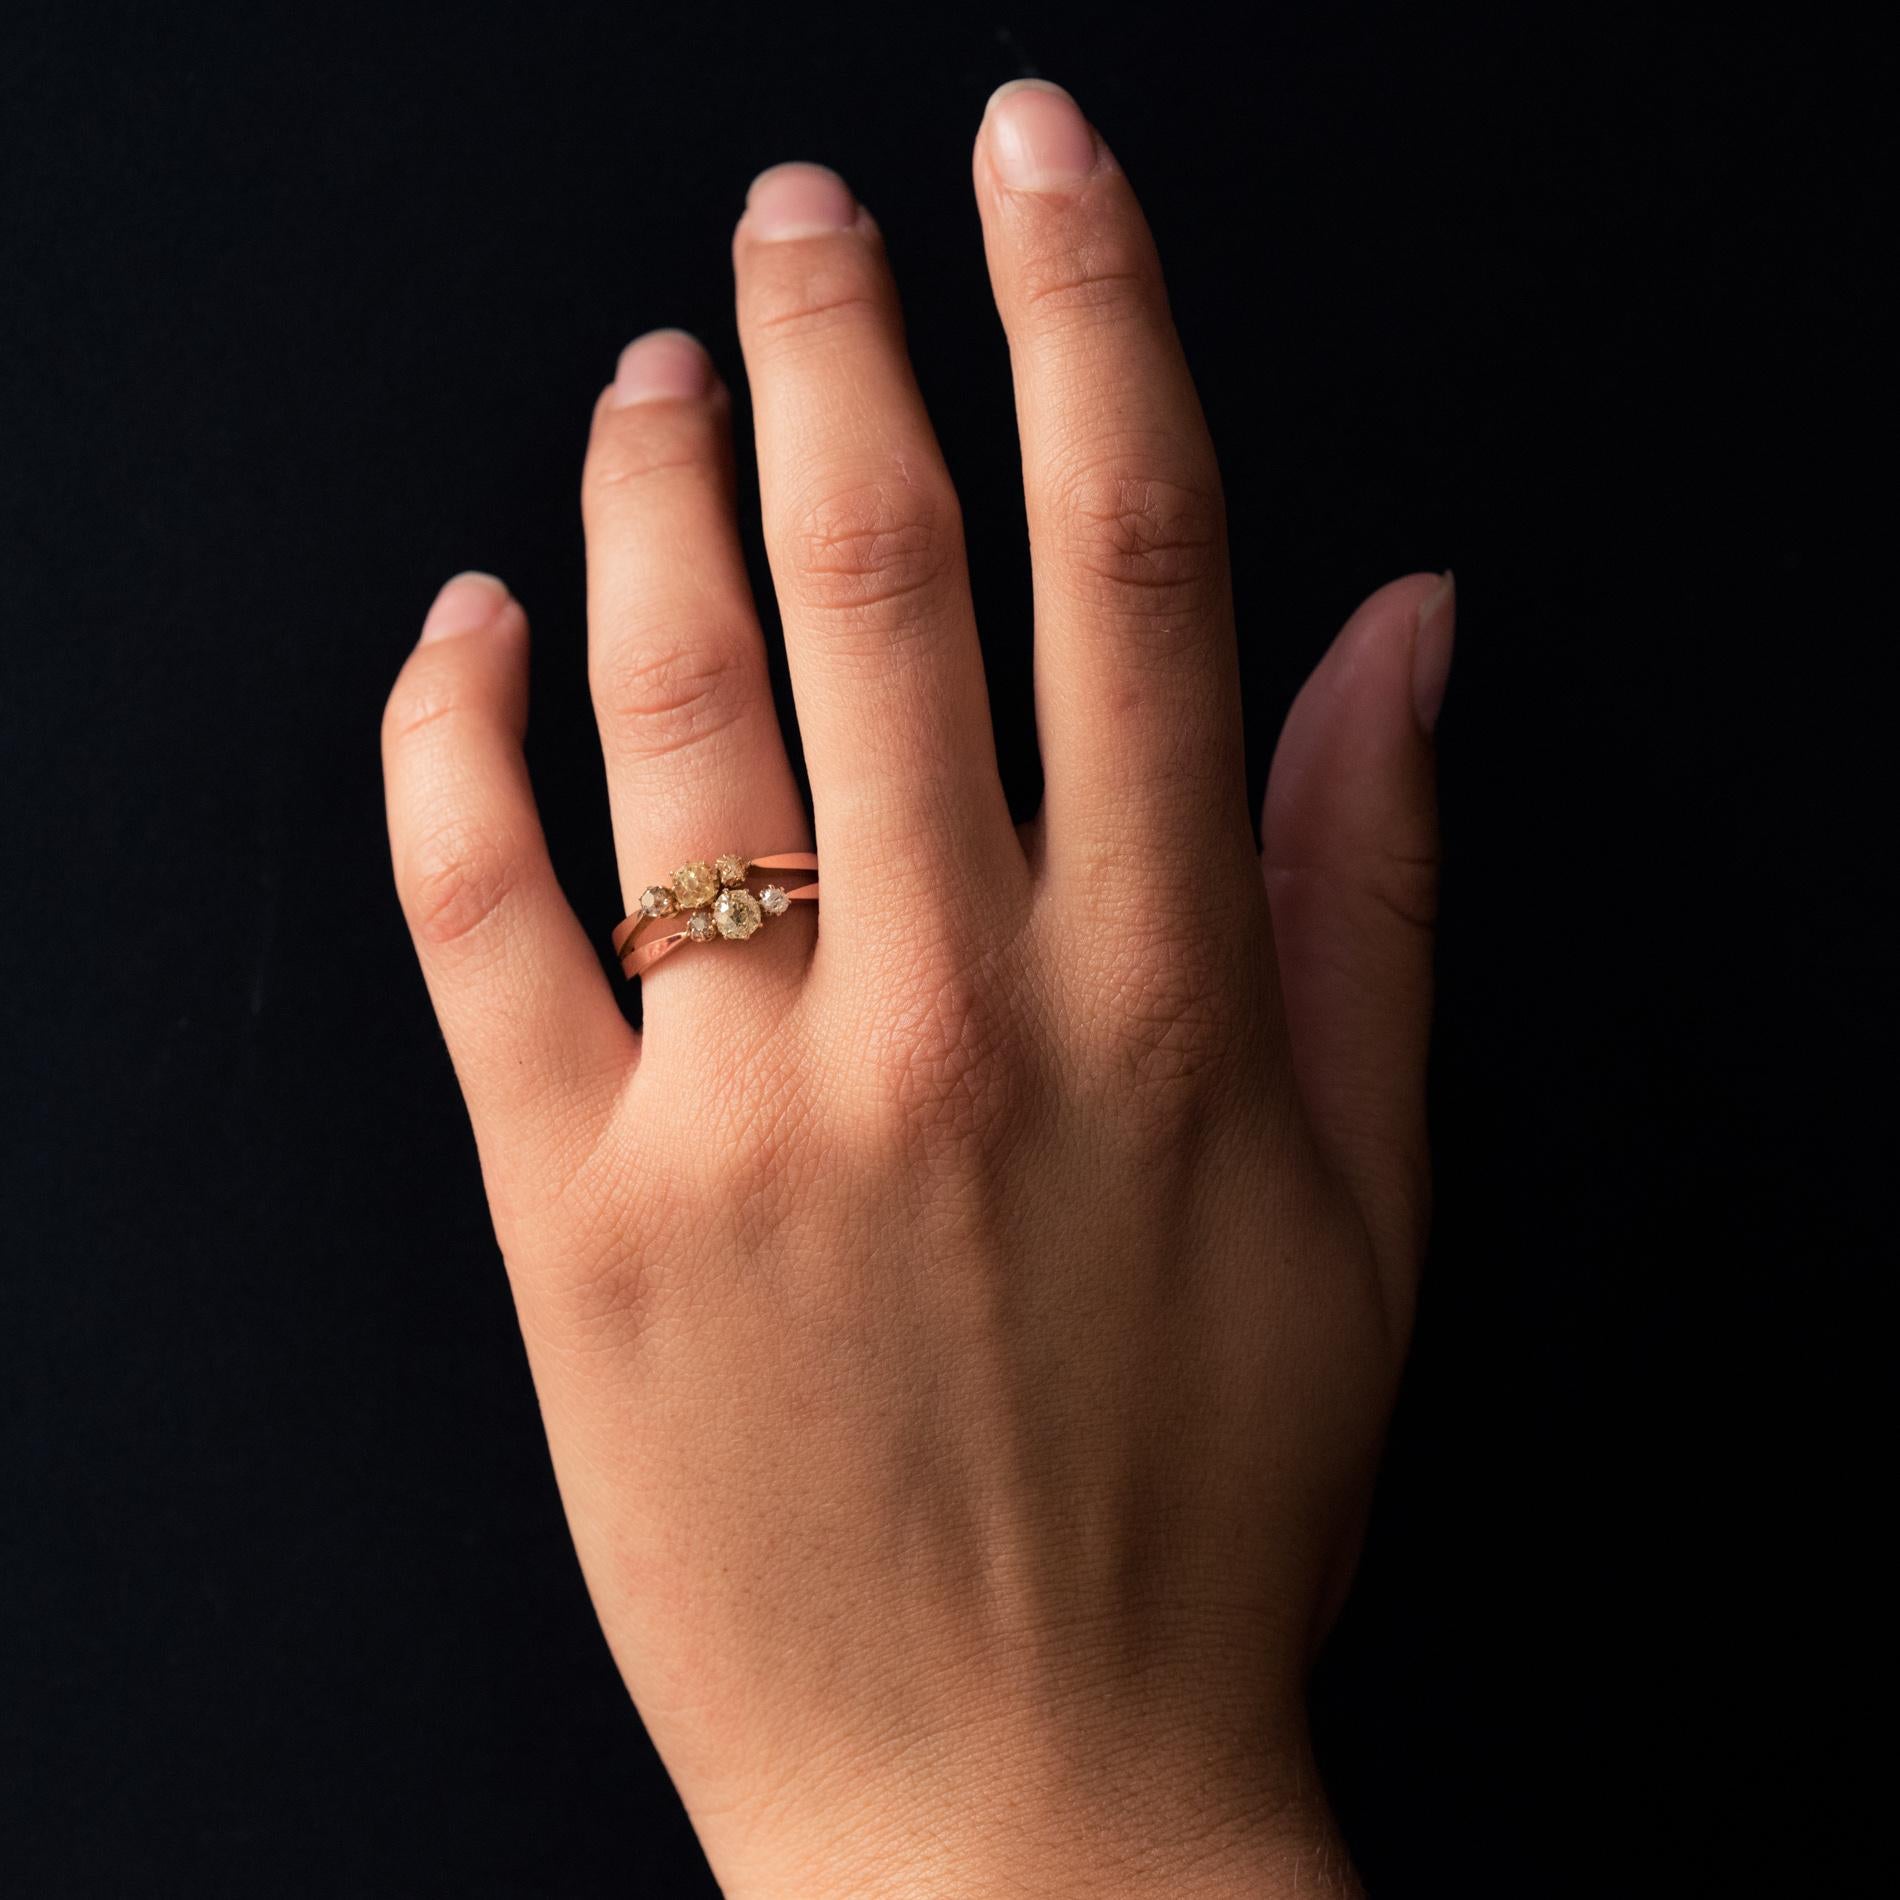 Ring in 18 karat rose gold.
Feminine antique ring, it is formed by 2 flat gold threads which are refined on the top and each hold an antique cushion- cut diamond shouldered on either side of two antique cut diamonds. One of the main diamonds is